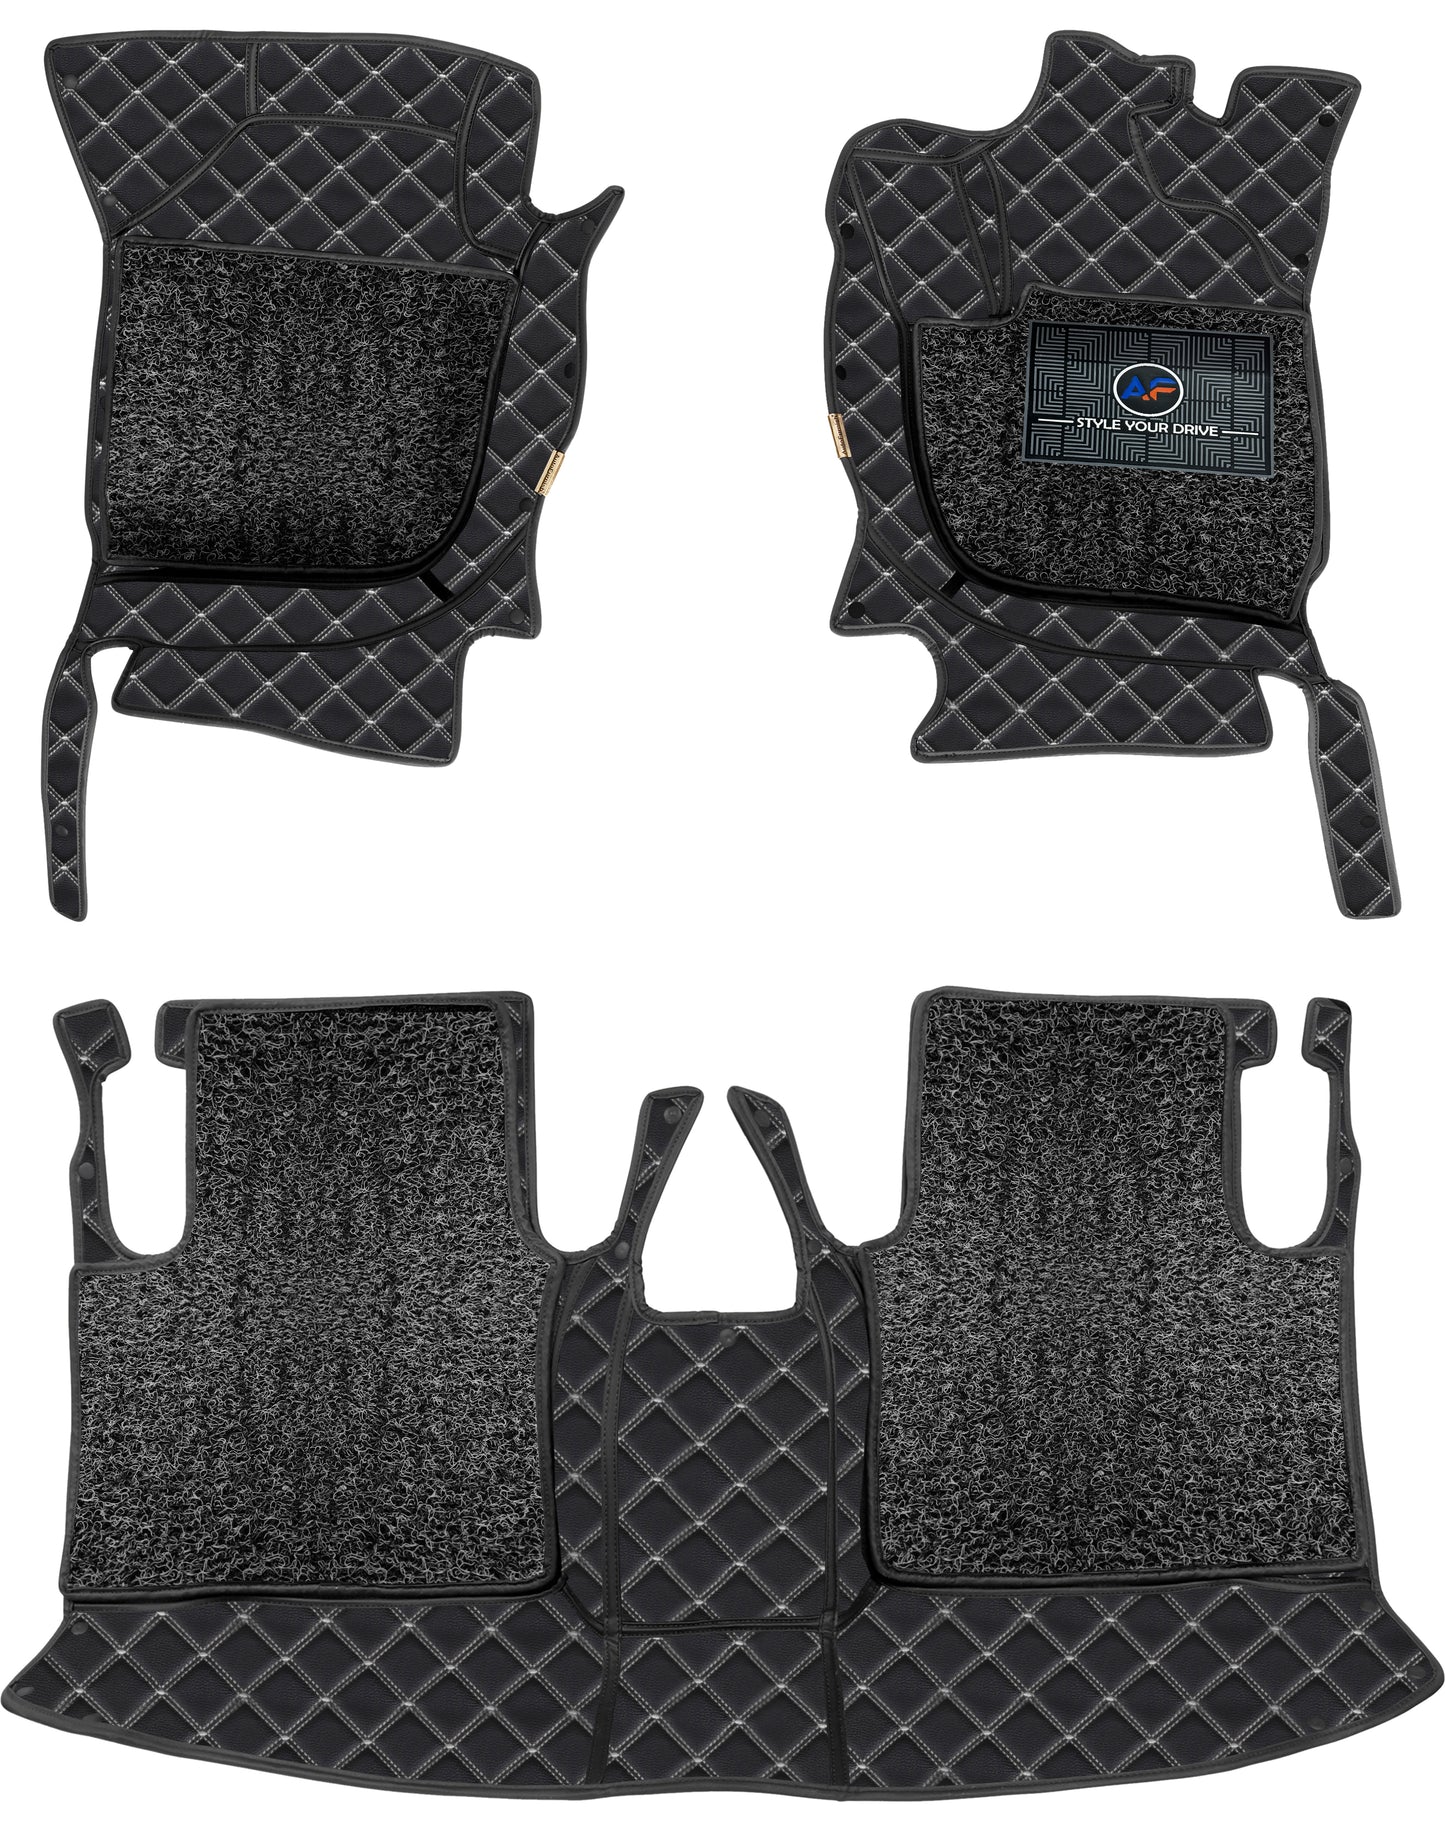 Hyundai Alcazar (6 Seater) 2021 7D Luxury Car Mat, All Weather Proof, Anti-Skid, 100% Waterproof & Odorless with Unique Diamond Fish Design (24mm Luxury PU Leather, 2 Rows)